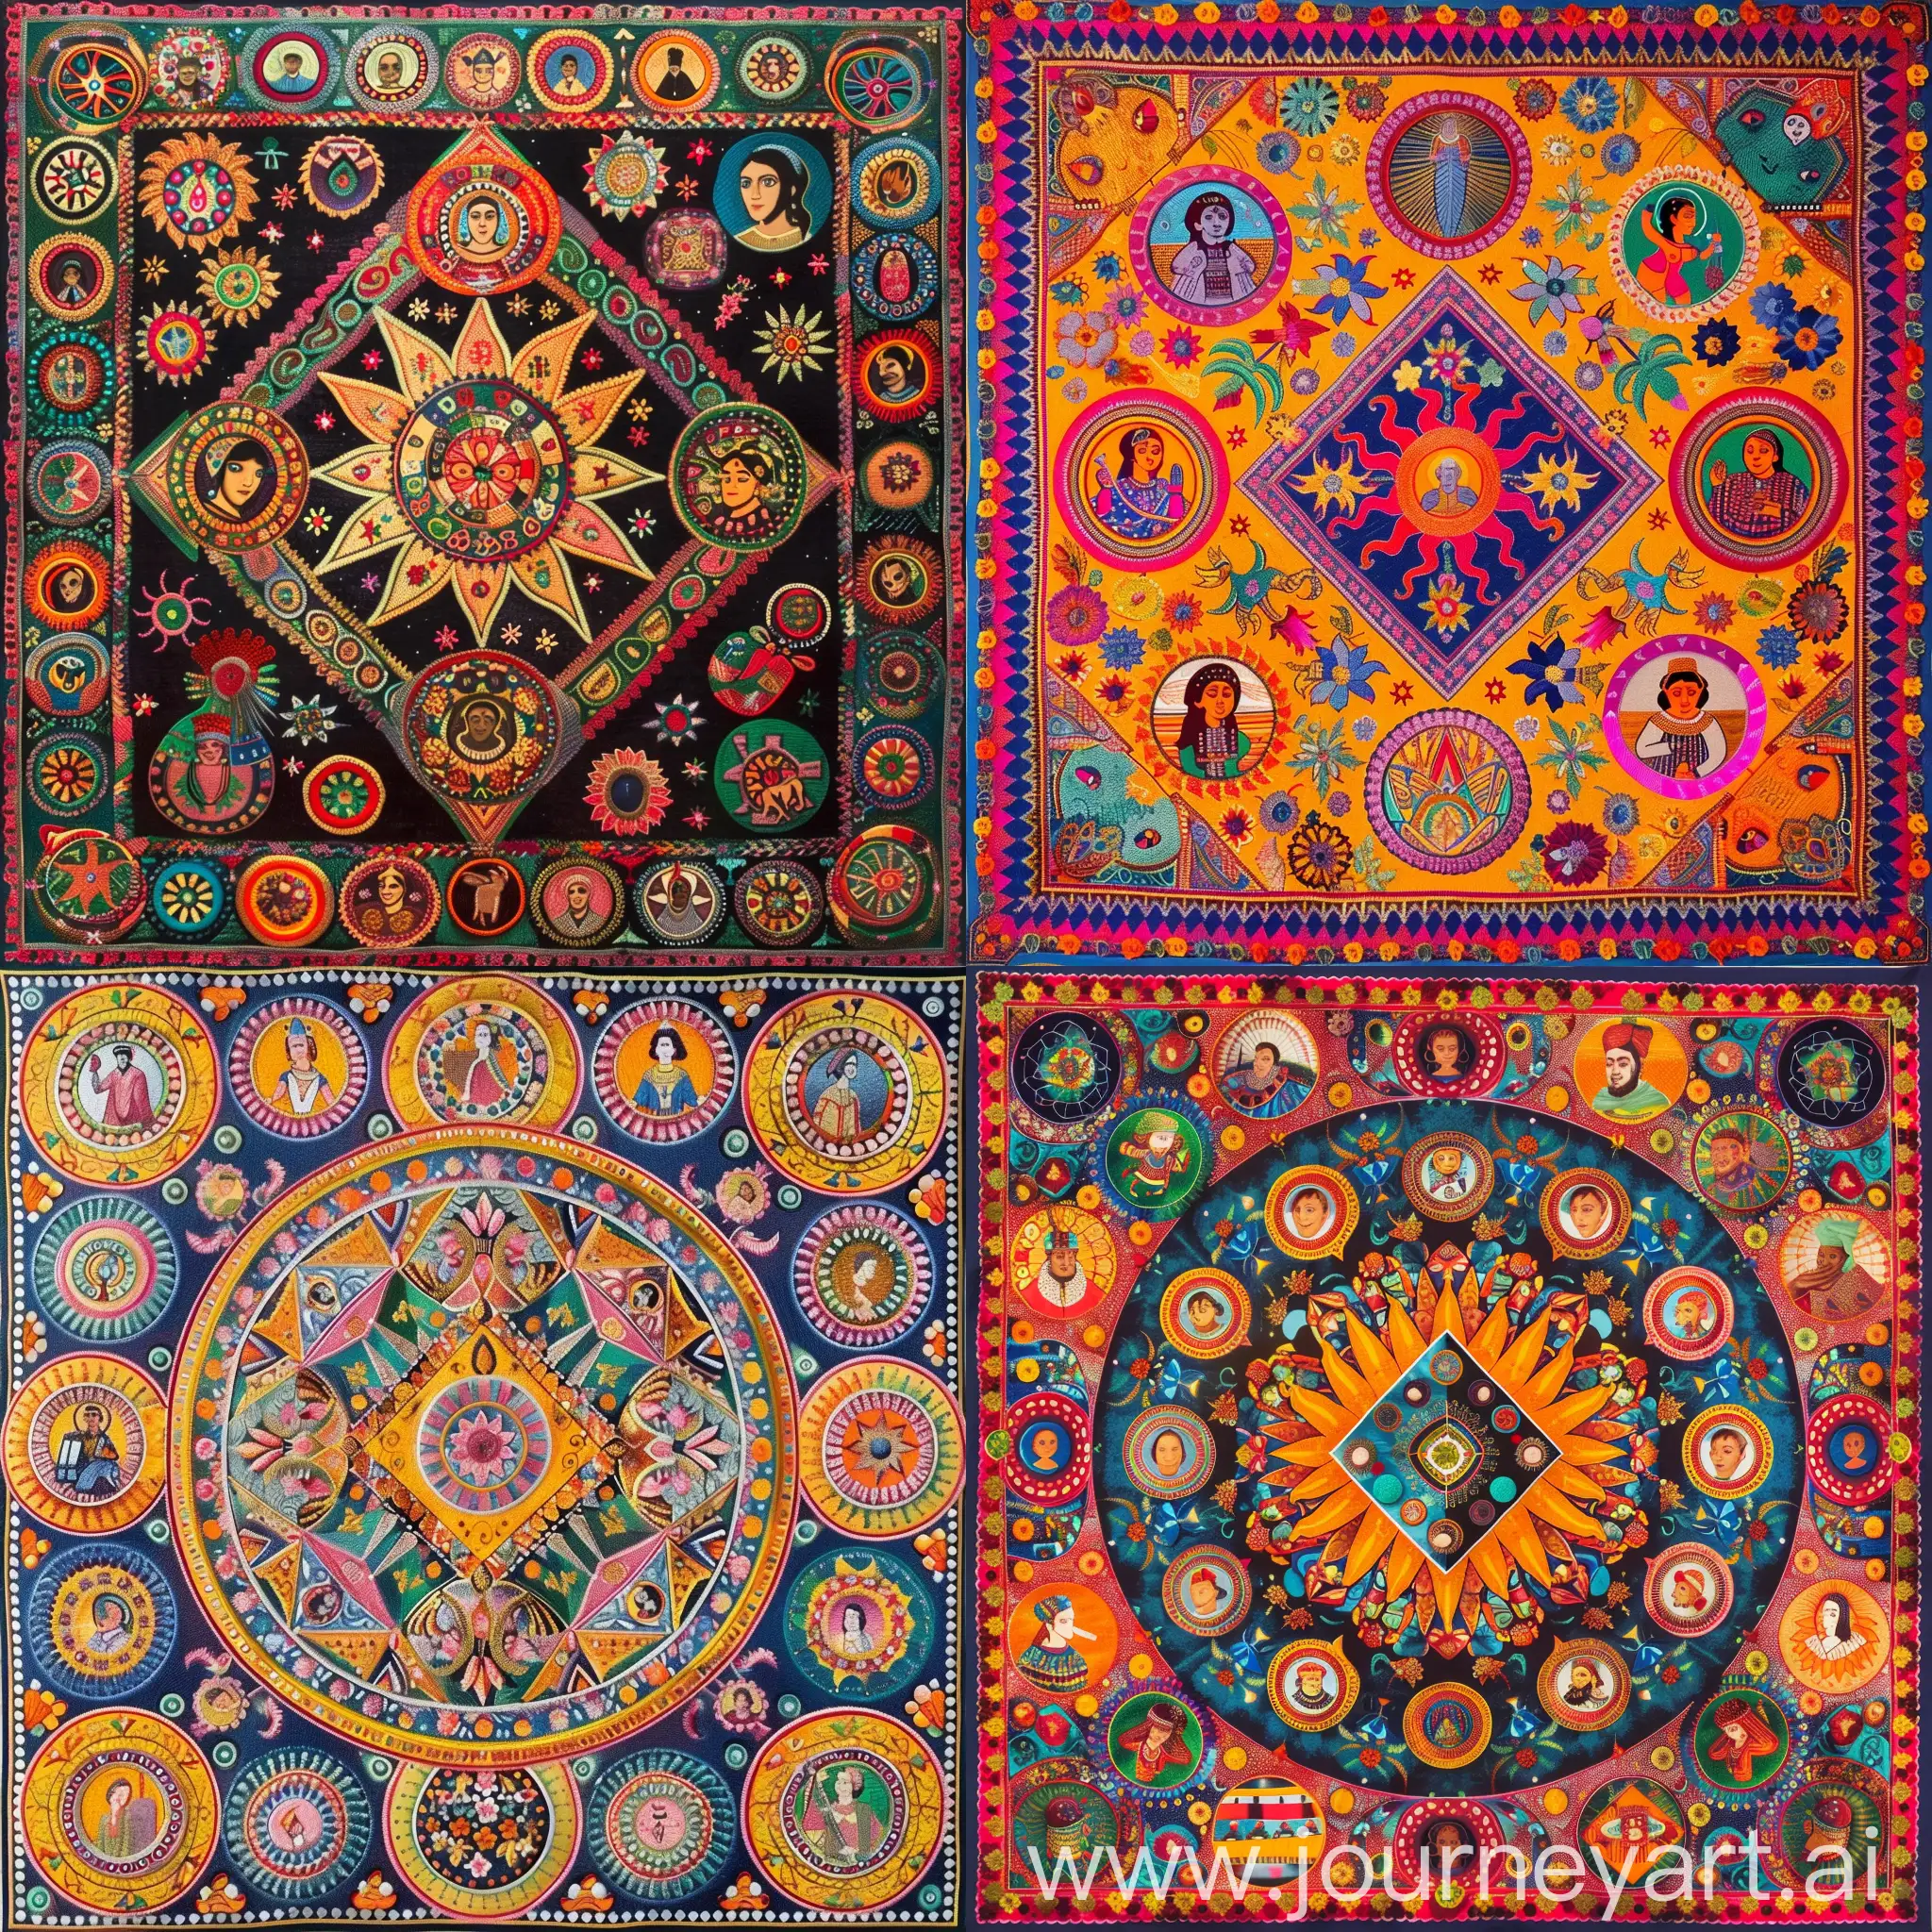 Colorful-Handcrafted-Textile-with-Diamond-Sun-Design-and-Historical-Figures